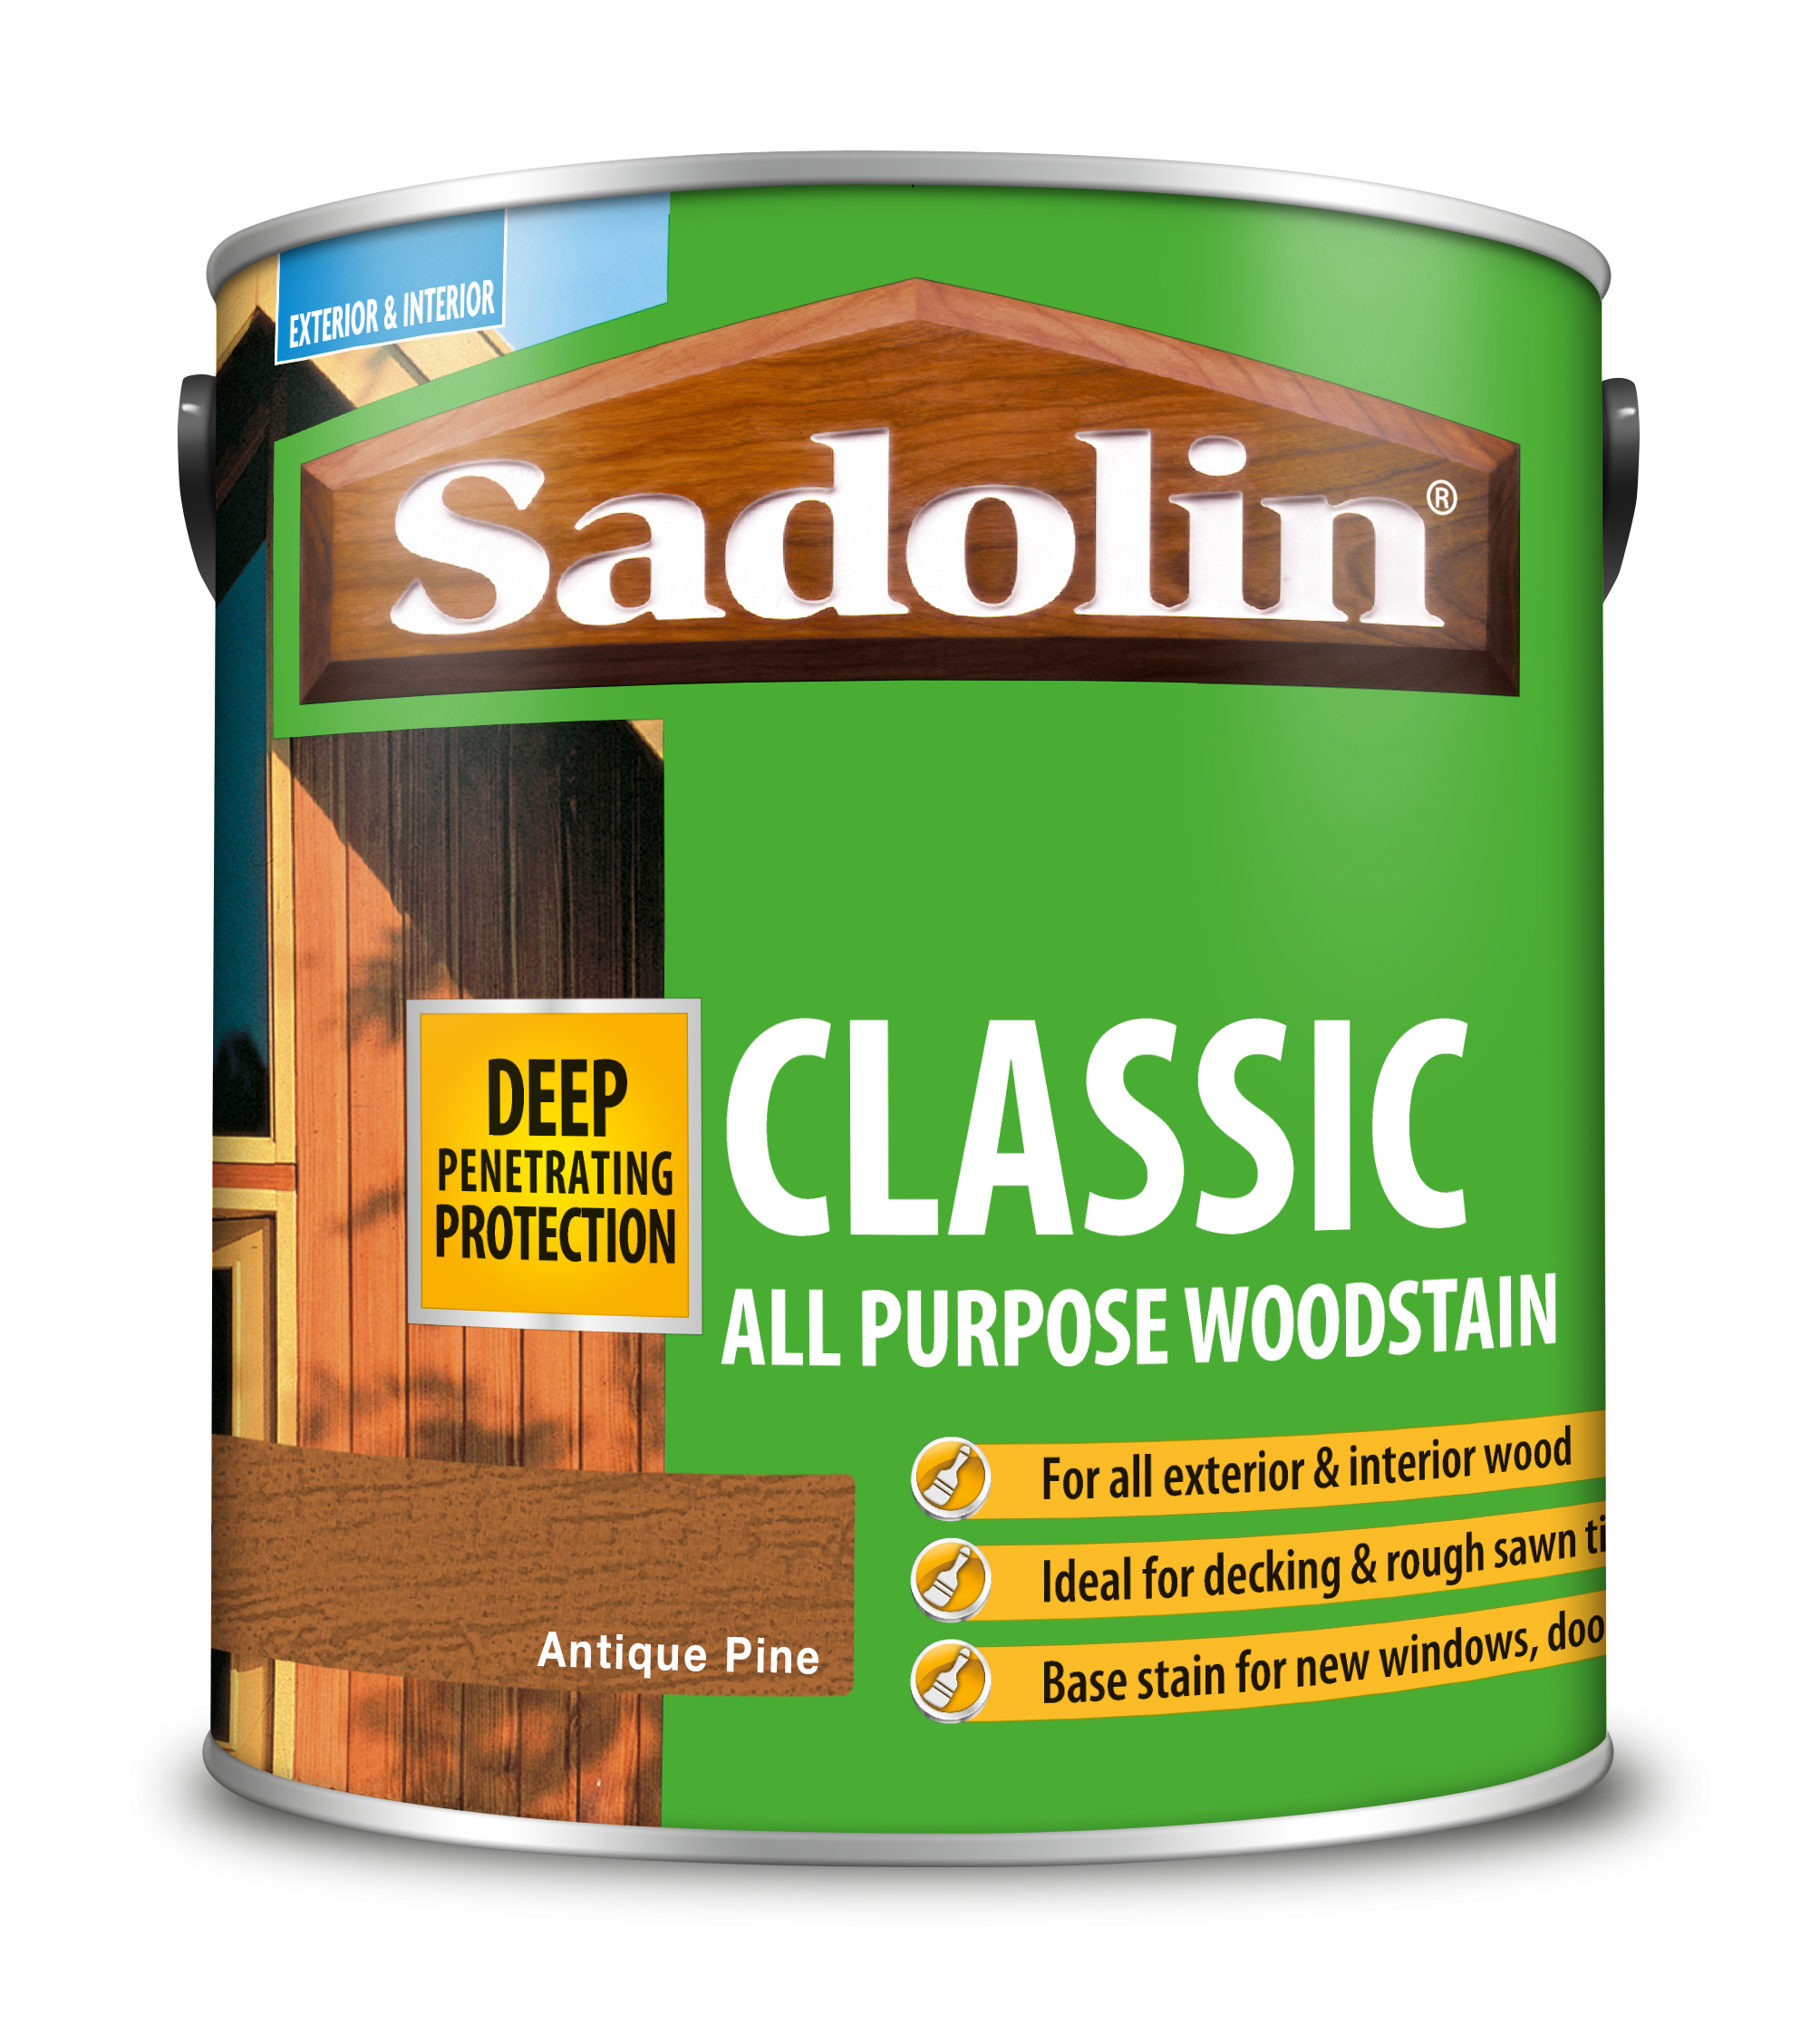 Sadolin Classic All Purpose Woodstain Antique Pine 2.5L [MPPSPPB]  5028458